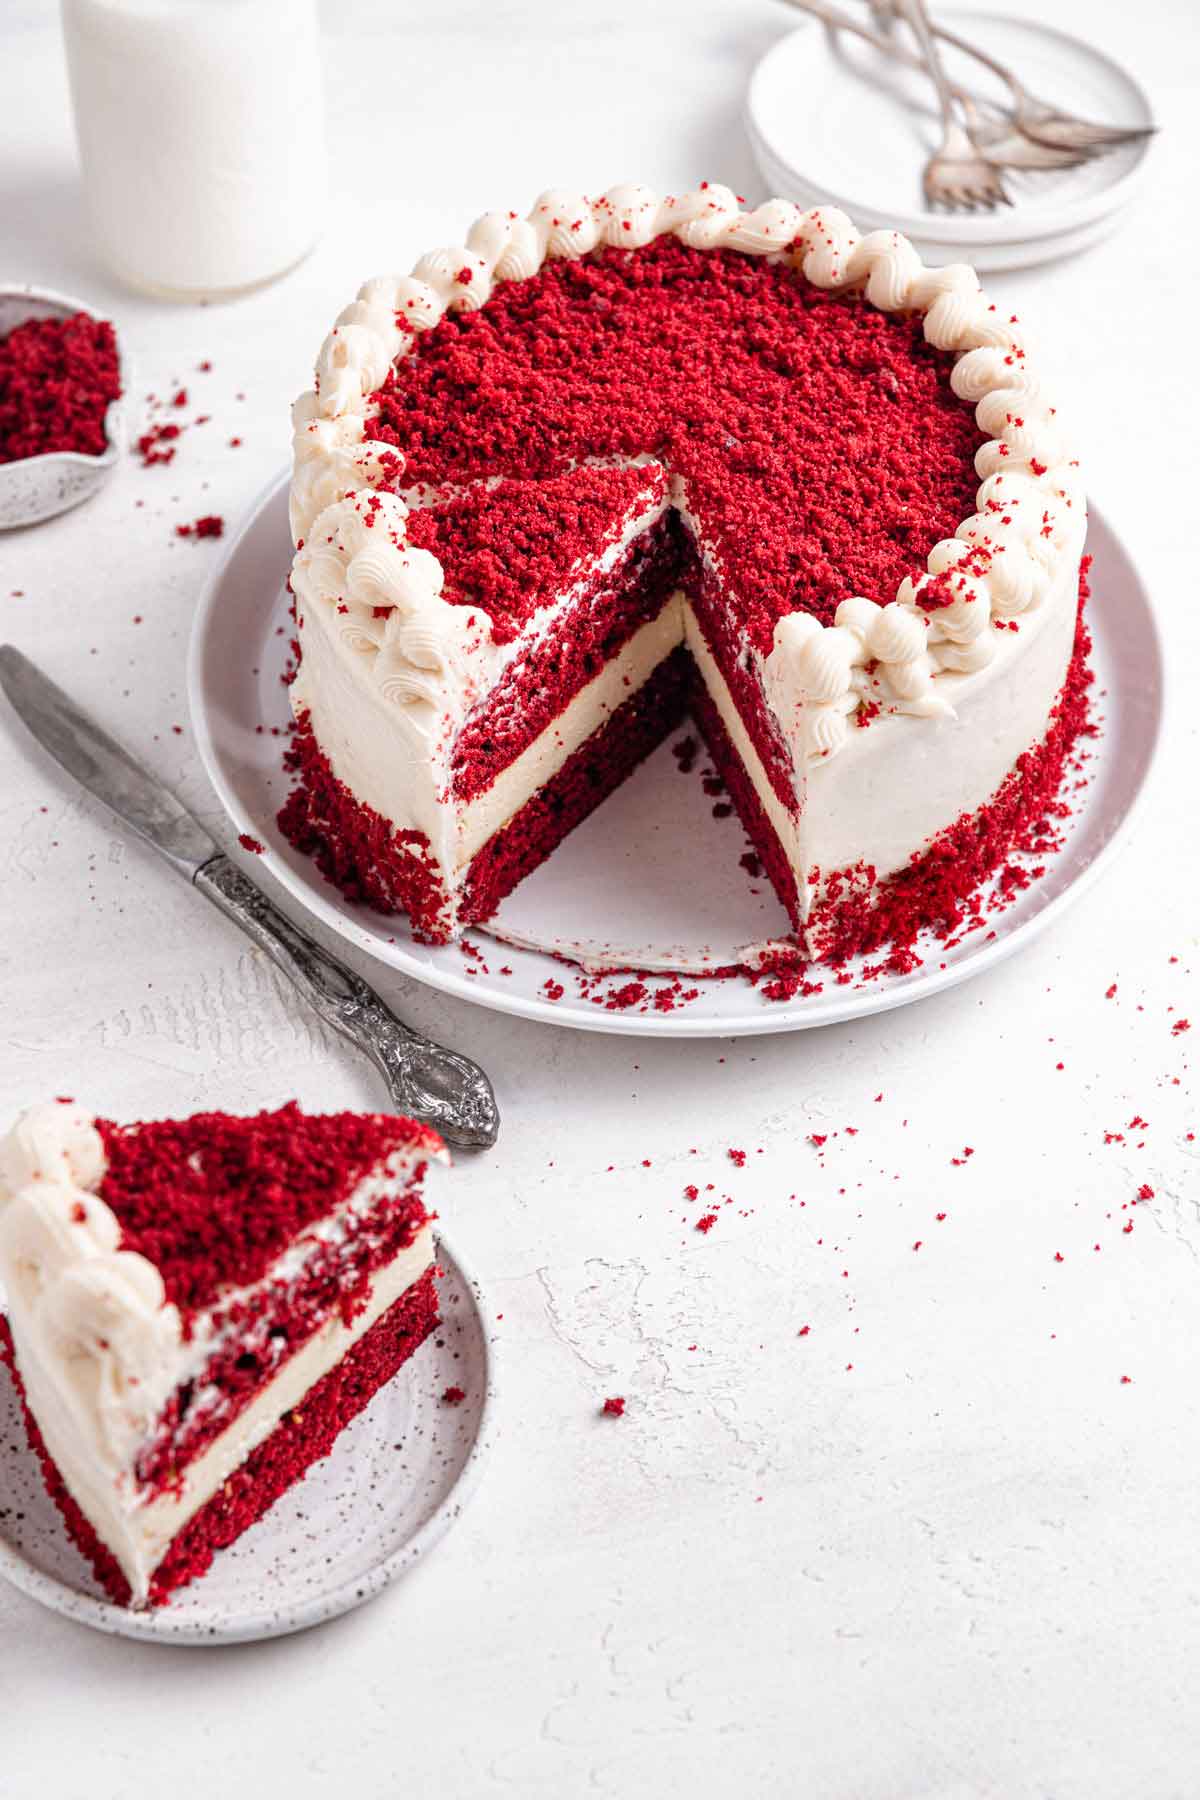 Assembled and decorated red velvet cheesecake on a serving platter with a single slice on a plate to the side.